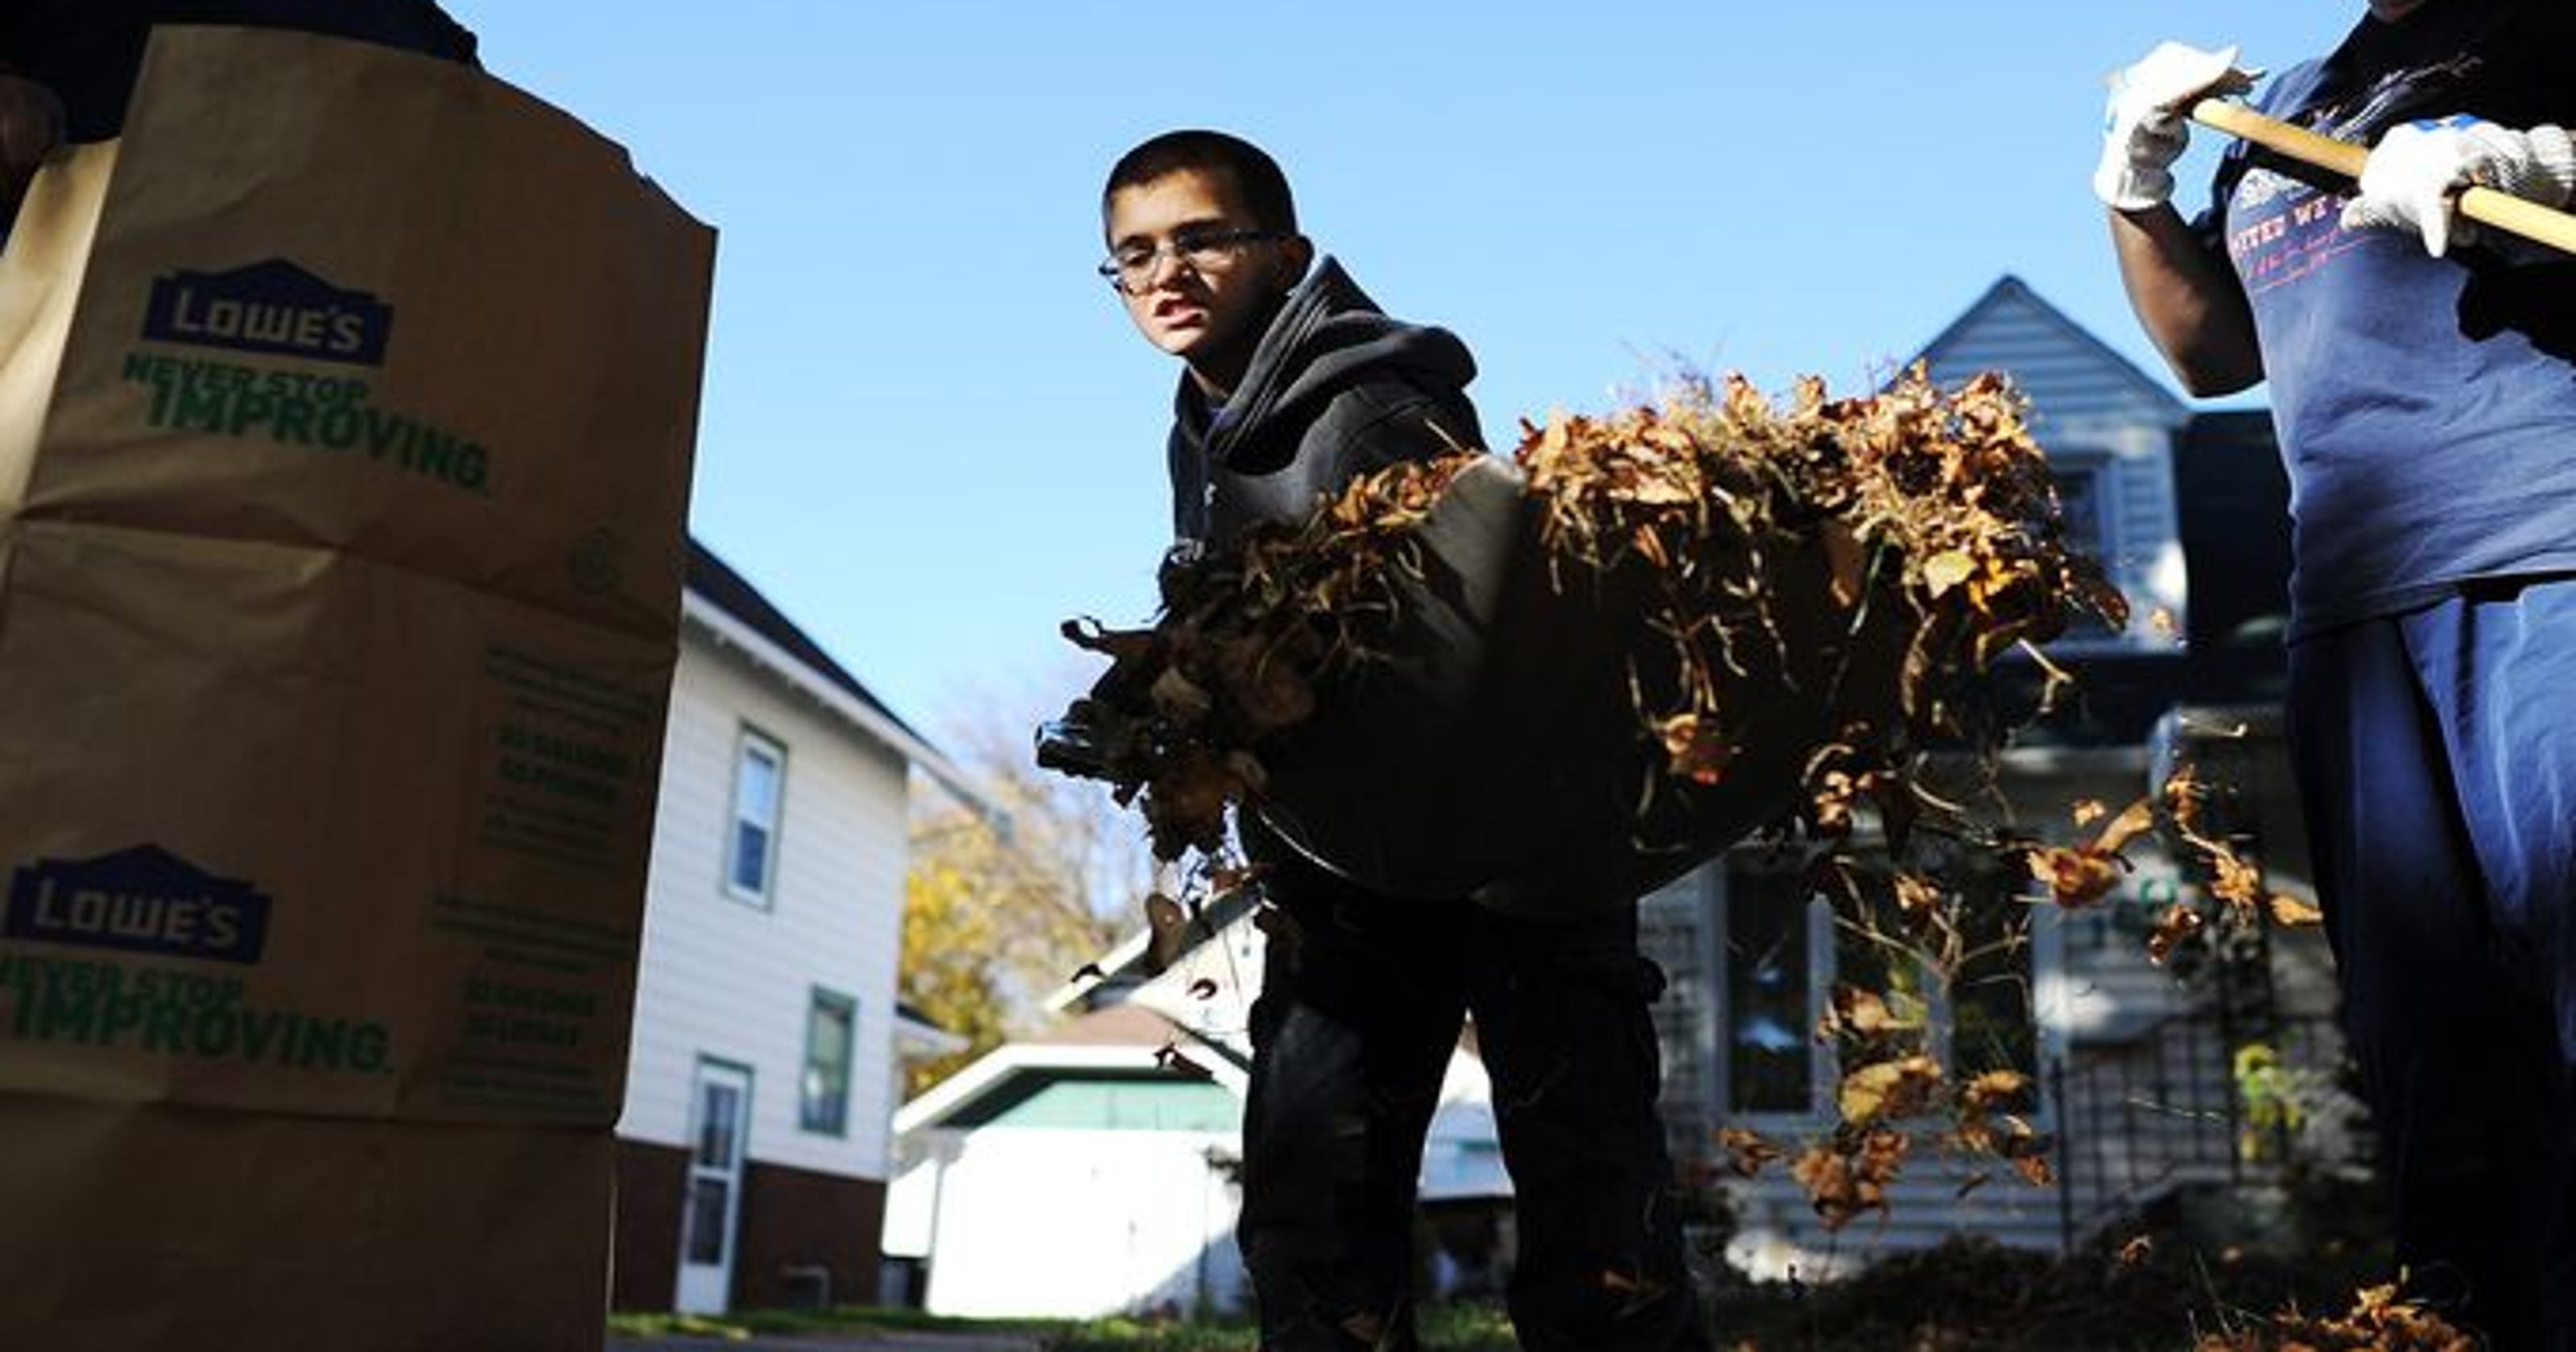 Sioux Falls stopped charging people to drop off leaves, and it paid off